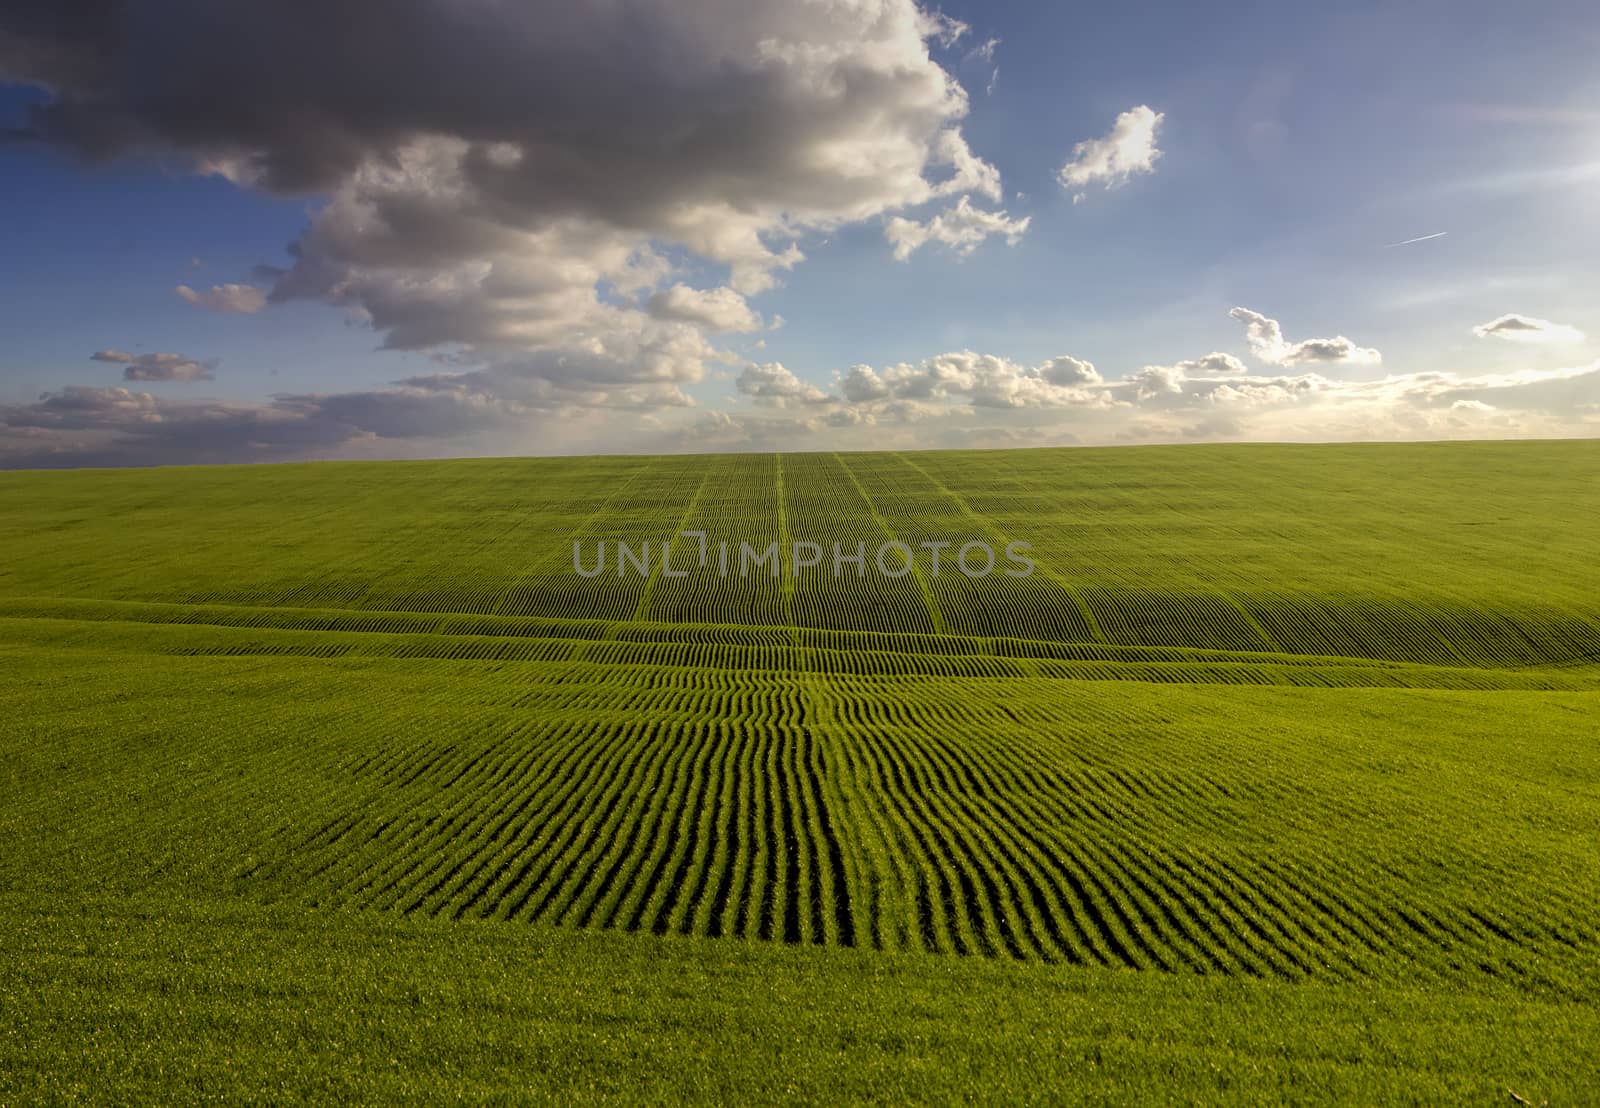 Stunning landscape of green young wheat field and day sky with clouds